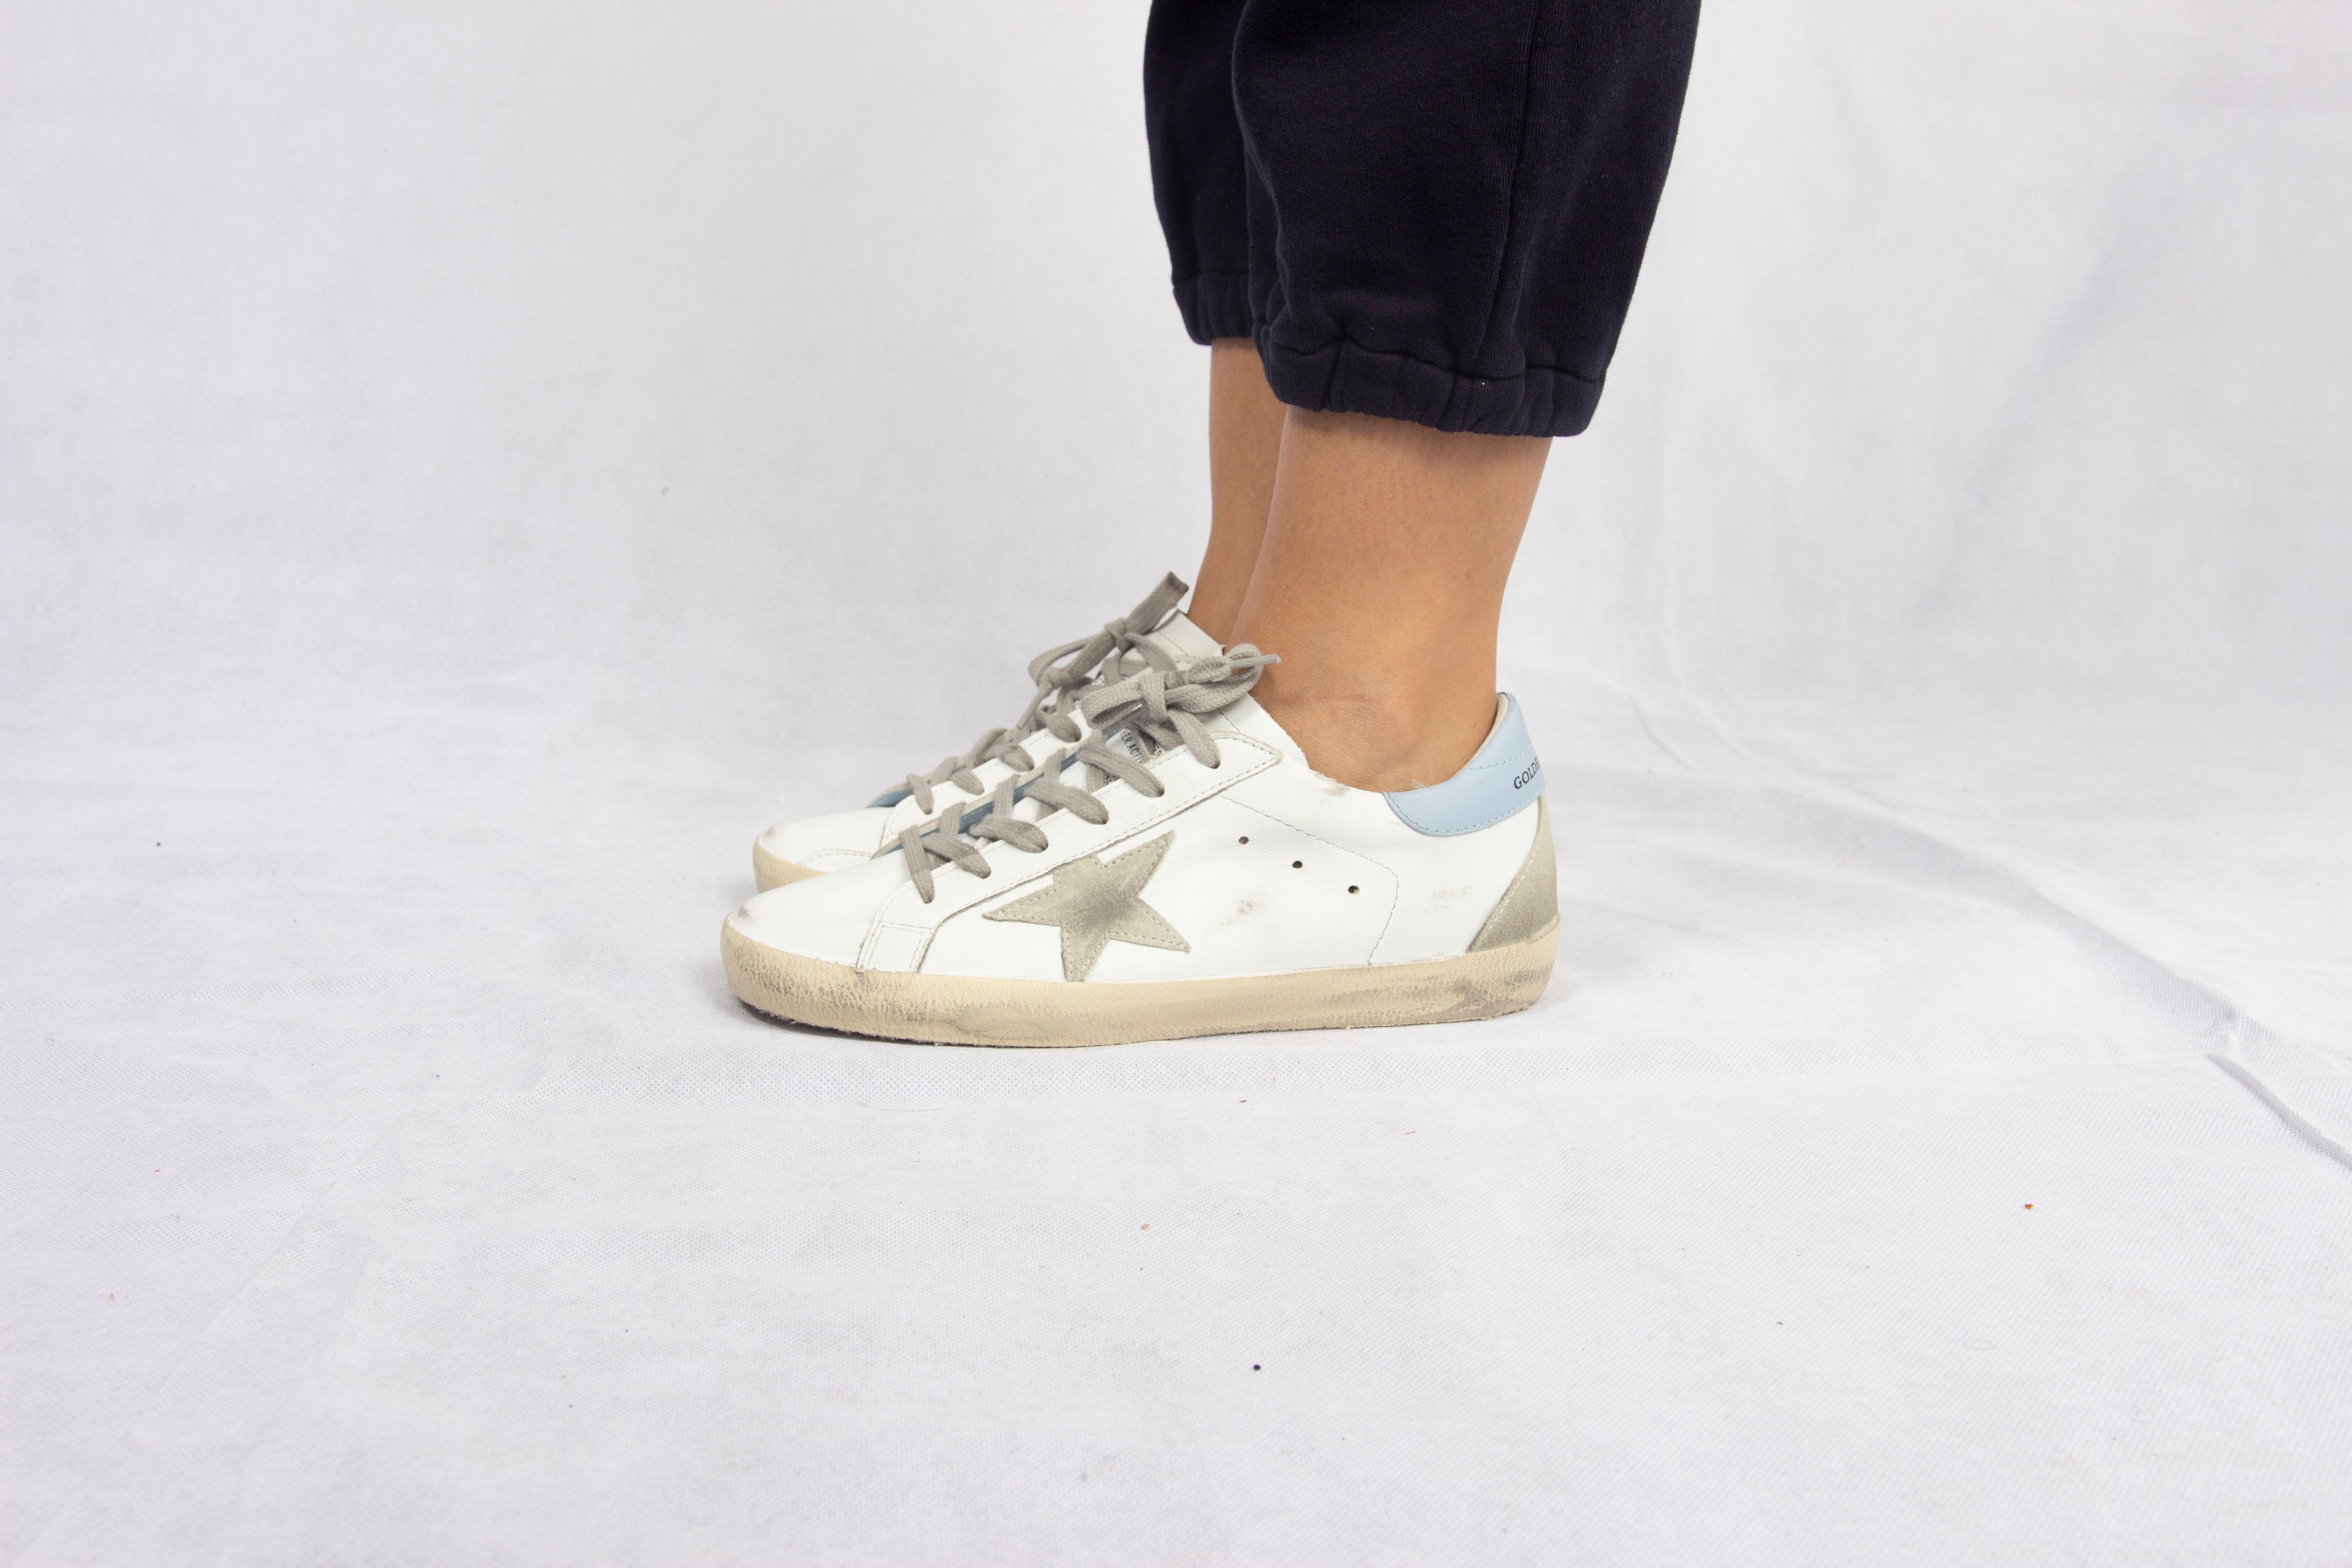 GG Superstar Leather Trainers in White and Powder Blue